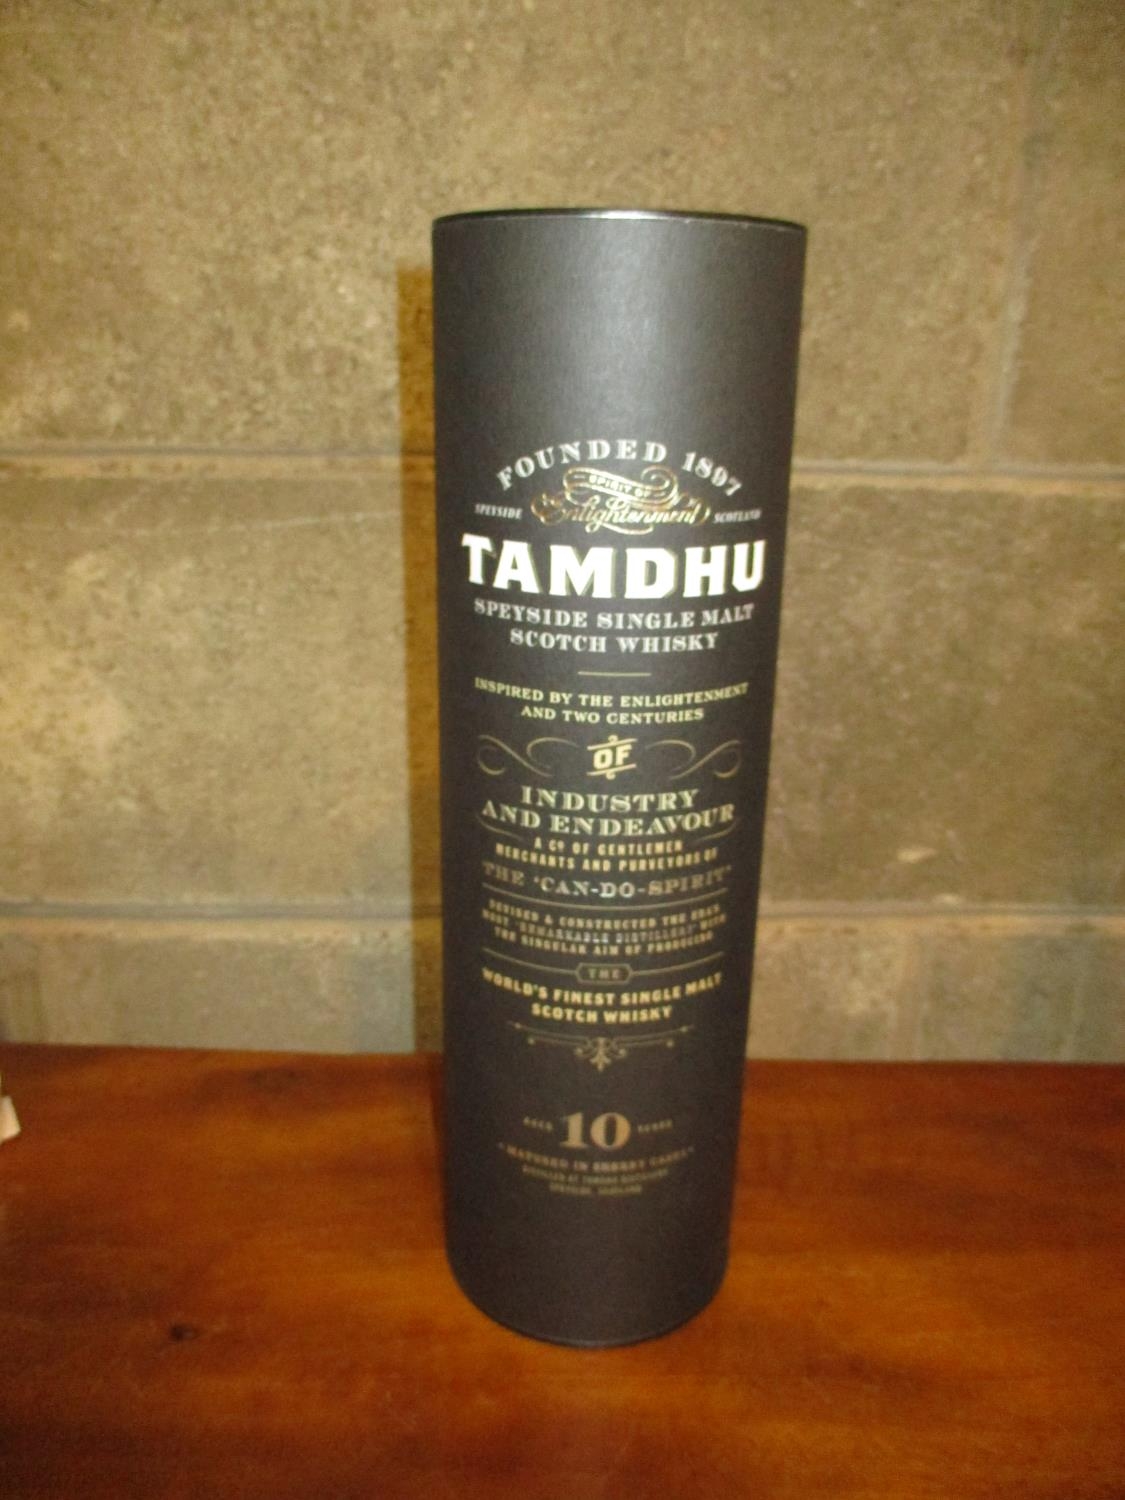 Tamdhu 10 Years Old Speyside Single Malt Whisky Industry and Endeavour The Can Do Spirit